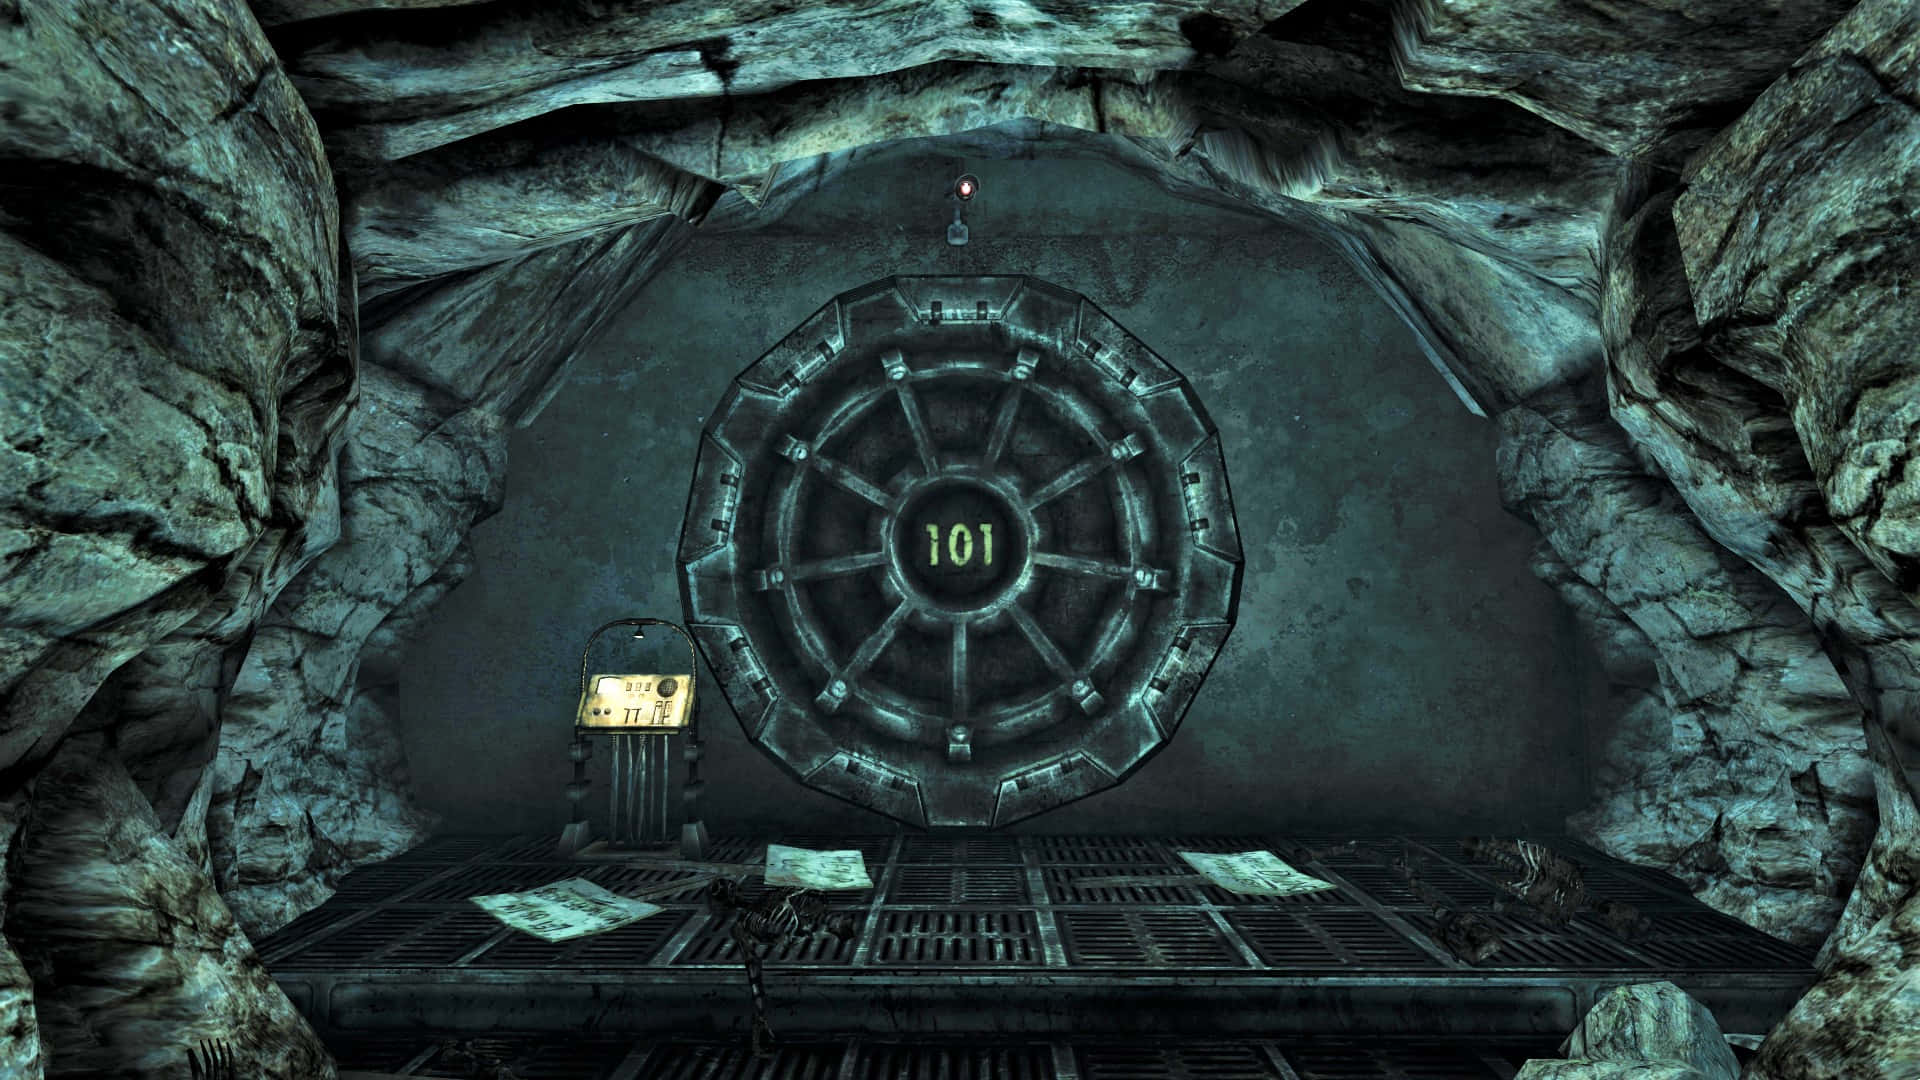 Vault 101 Entrance - A Glimpse into the World after Apocalypse Wallpaper